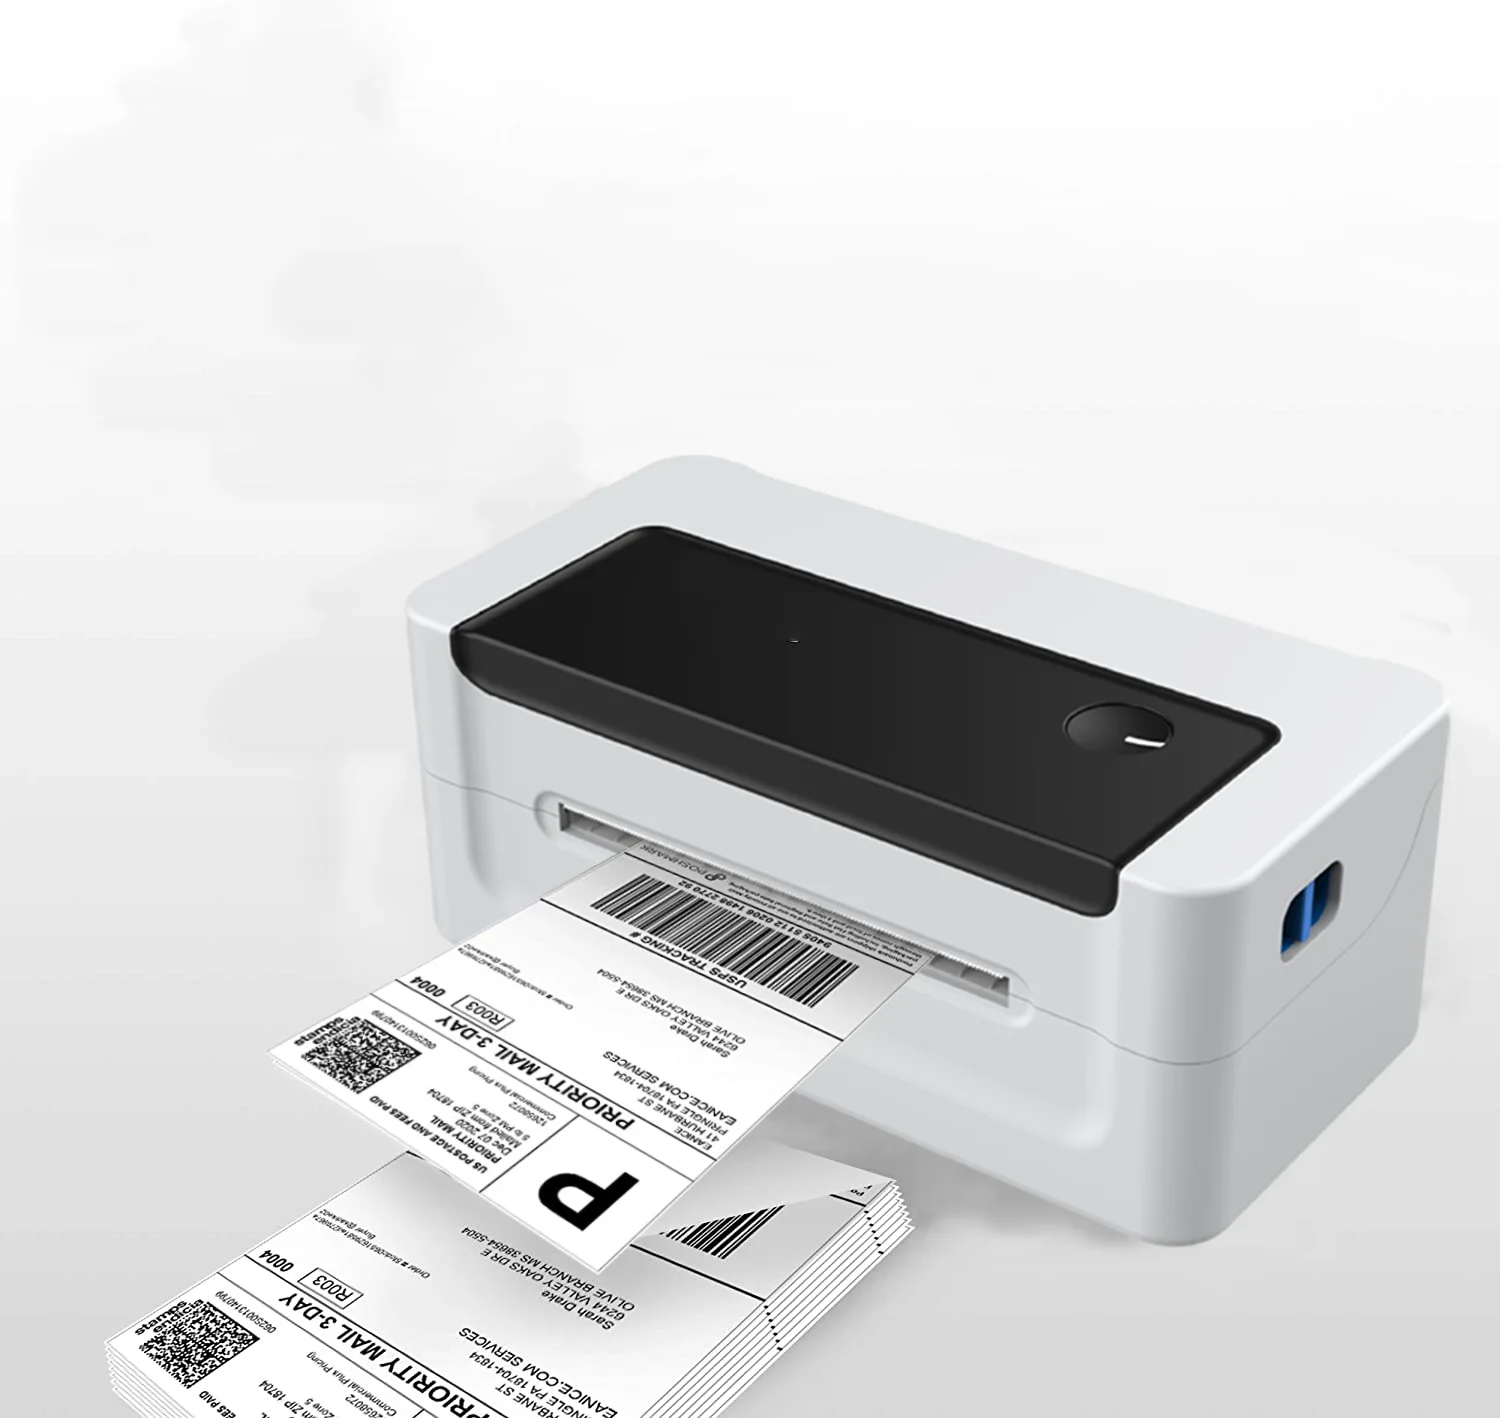 

Direct Thermal High Printing Speed Printer Compatible with Etsy, eBay, Amazon packing Barcode Label Printer 4x6